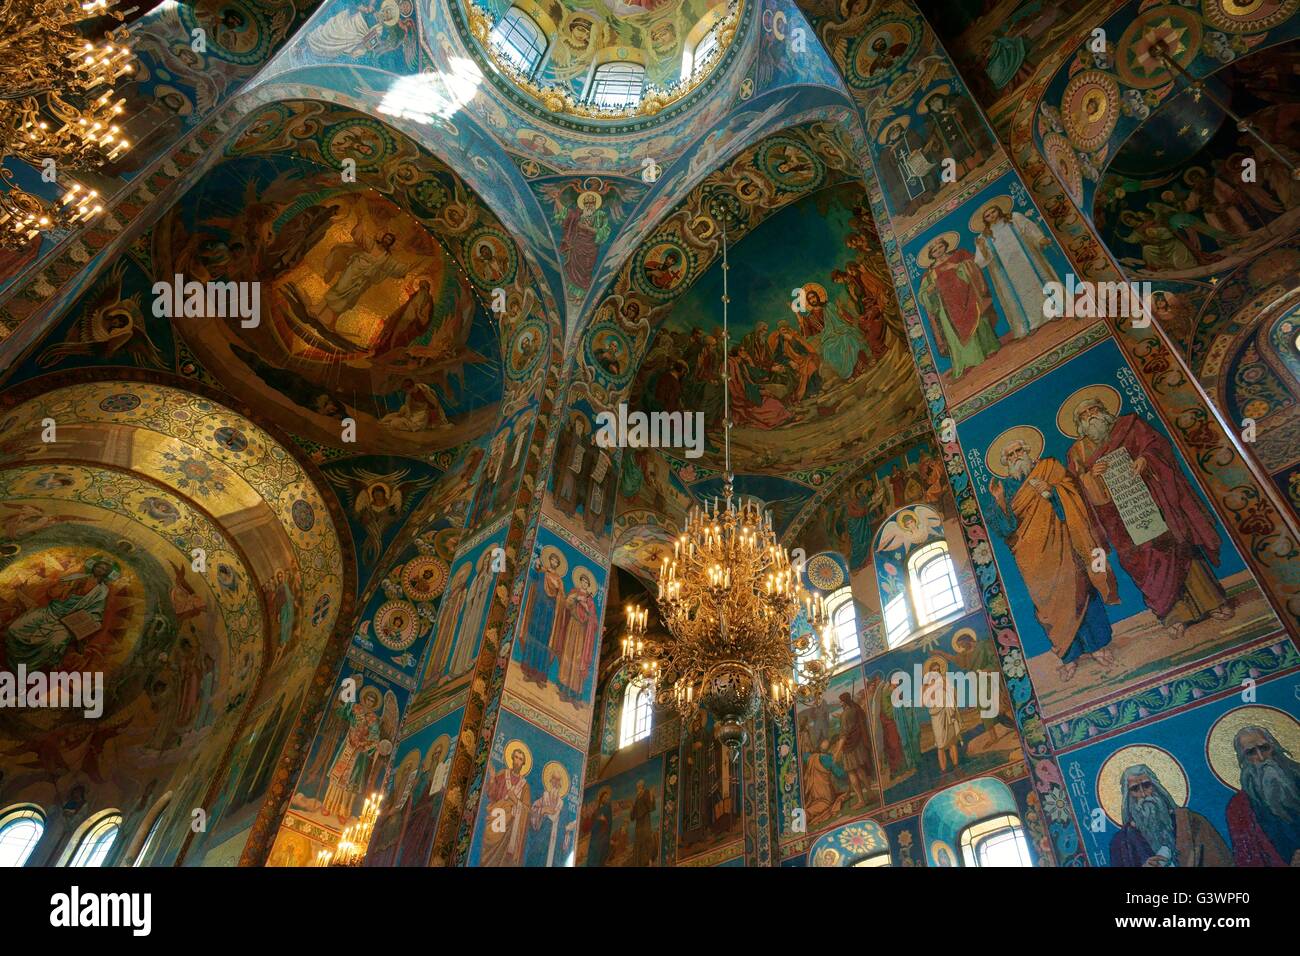 Saint Petersburg Russia. Russian Orthodox Church of the Saviour on Spilled Blood. Interior mosaics beneath the central dome Stock Photo